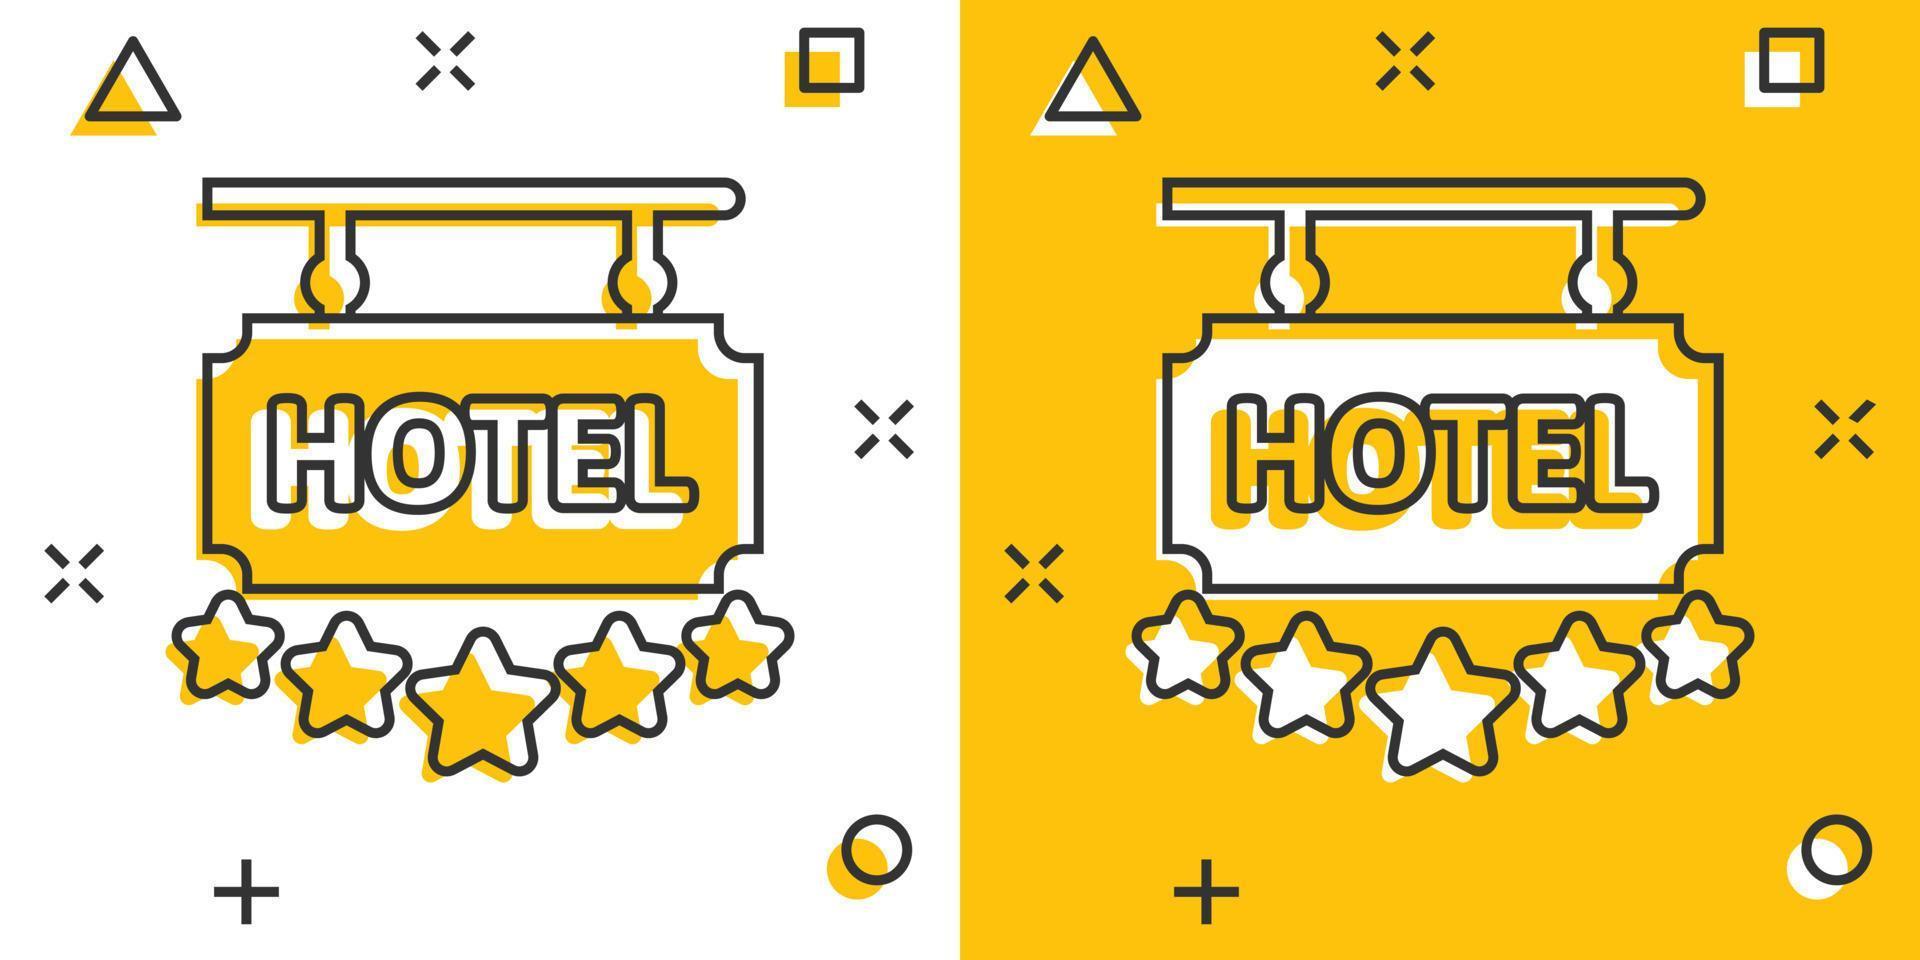 Hotel 5 stars sign icon in comic style. Inn cartoon vector illustration on white isolated background. Hostel room information splash effect business concept.